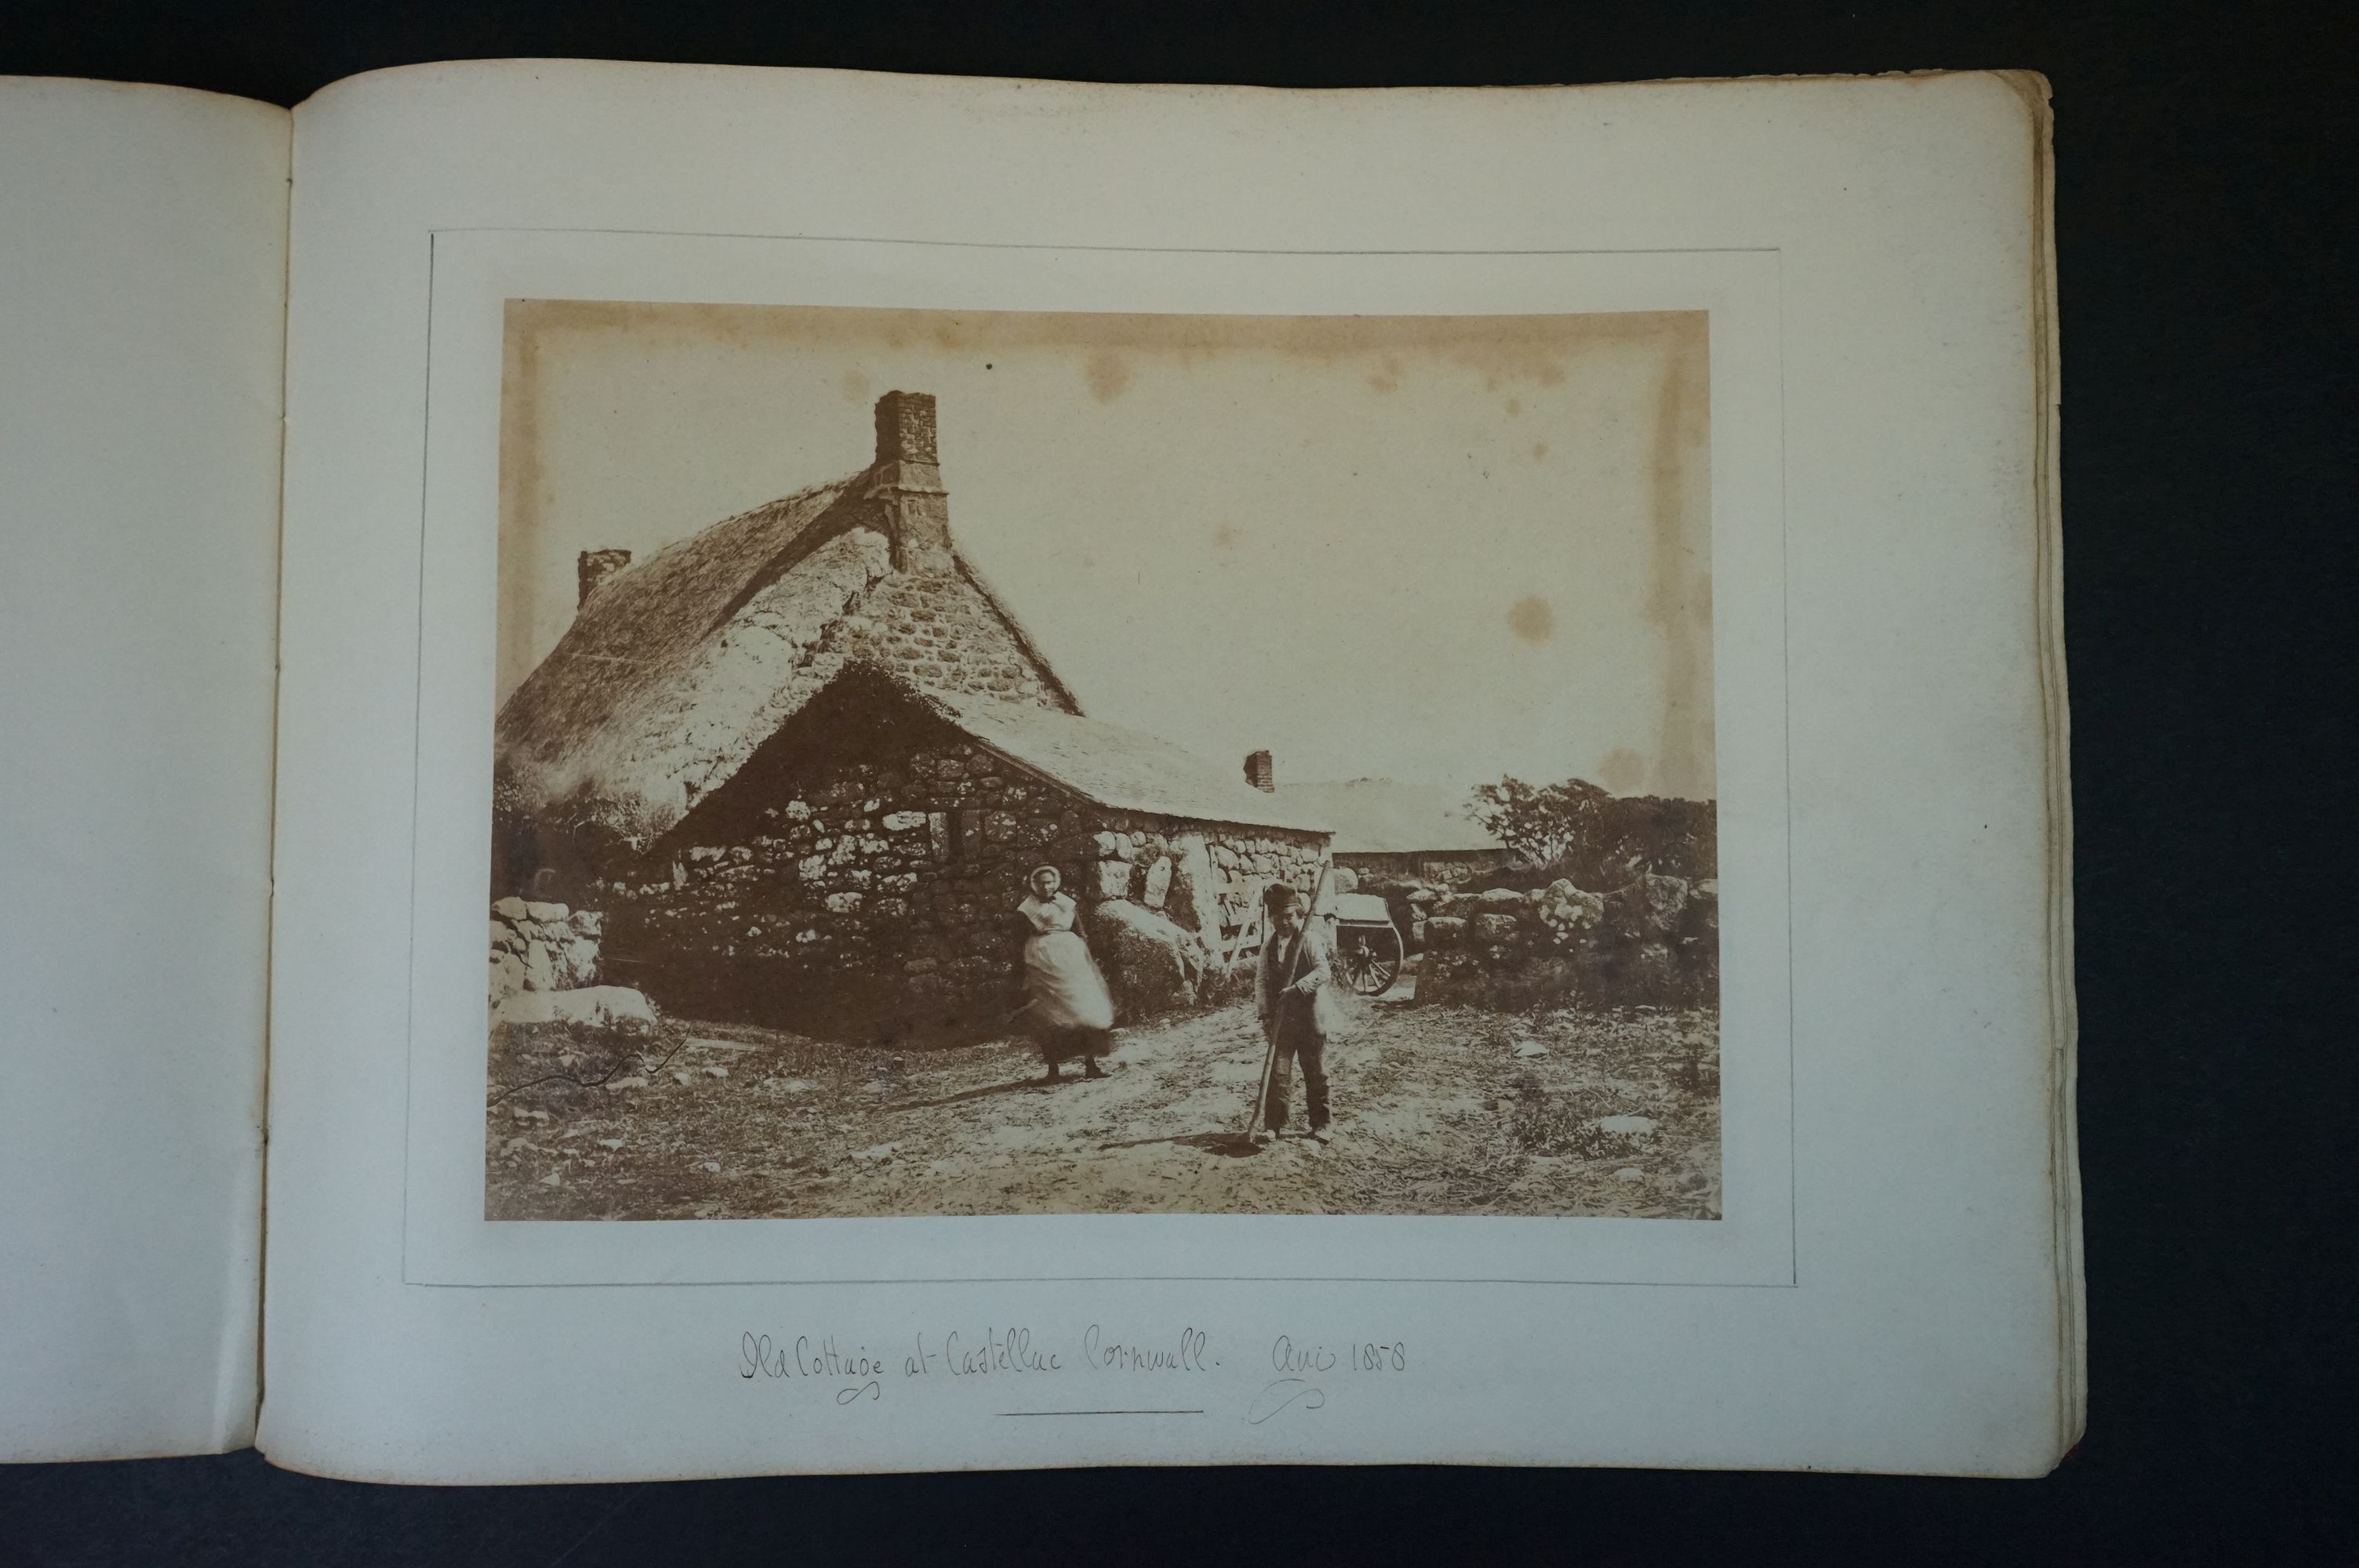 Photographic Illustrations by J.W.G. Gutch, M.R.C.S.L. Division No. 13. Deanery of Winchcombe. - Image 16 of 26